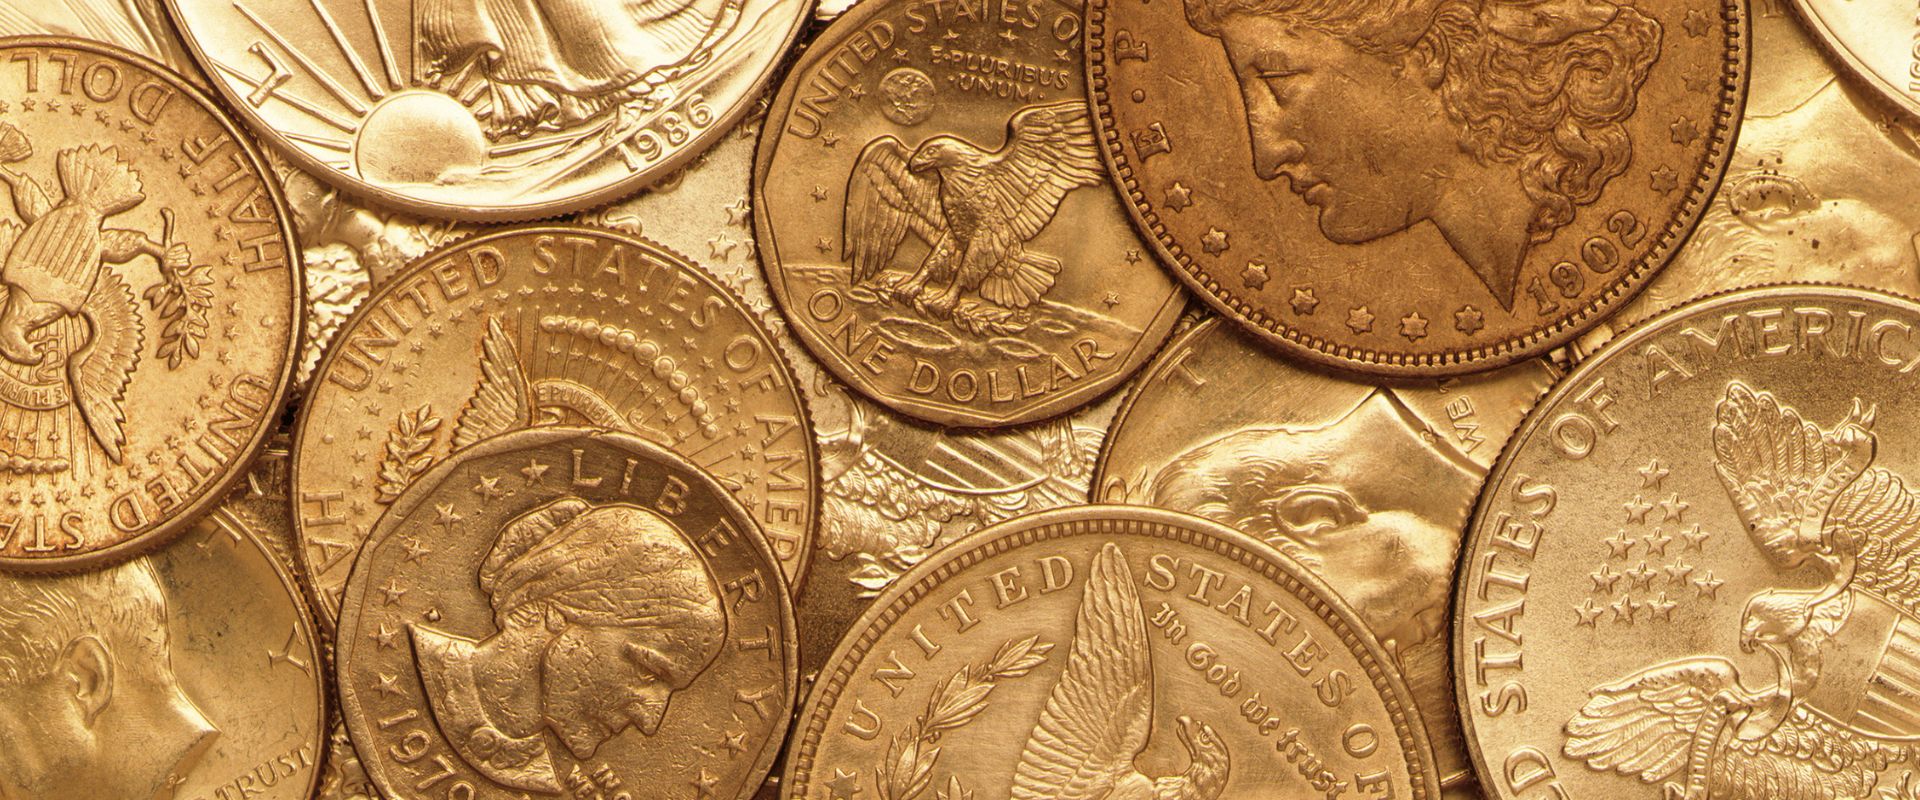 various American gold coins from different years